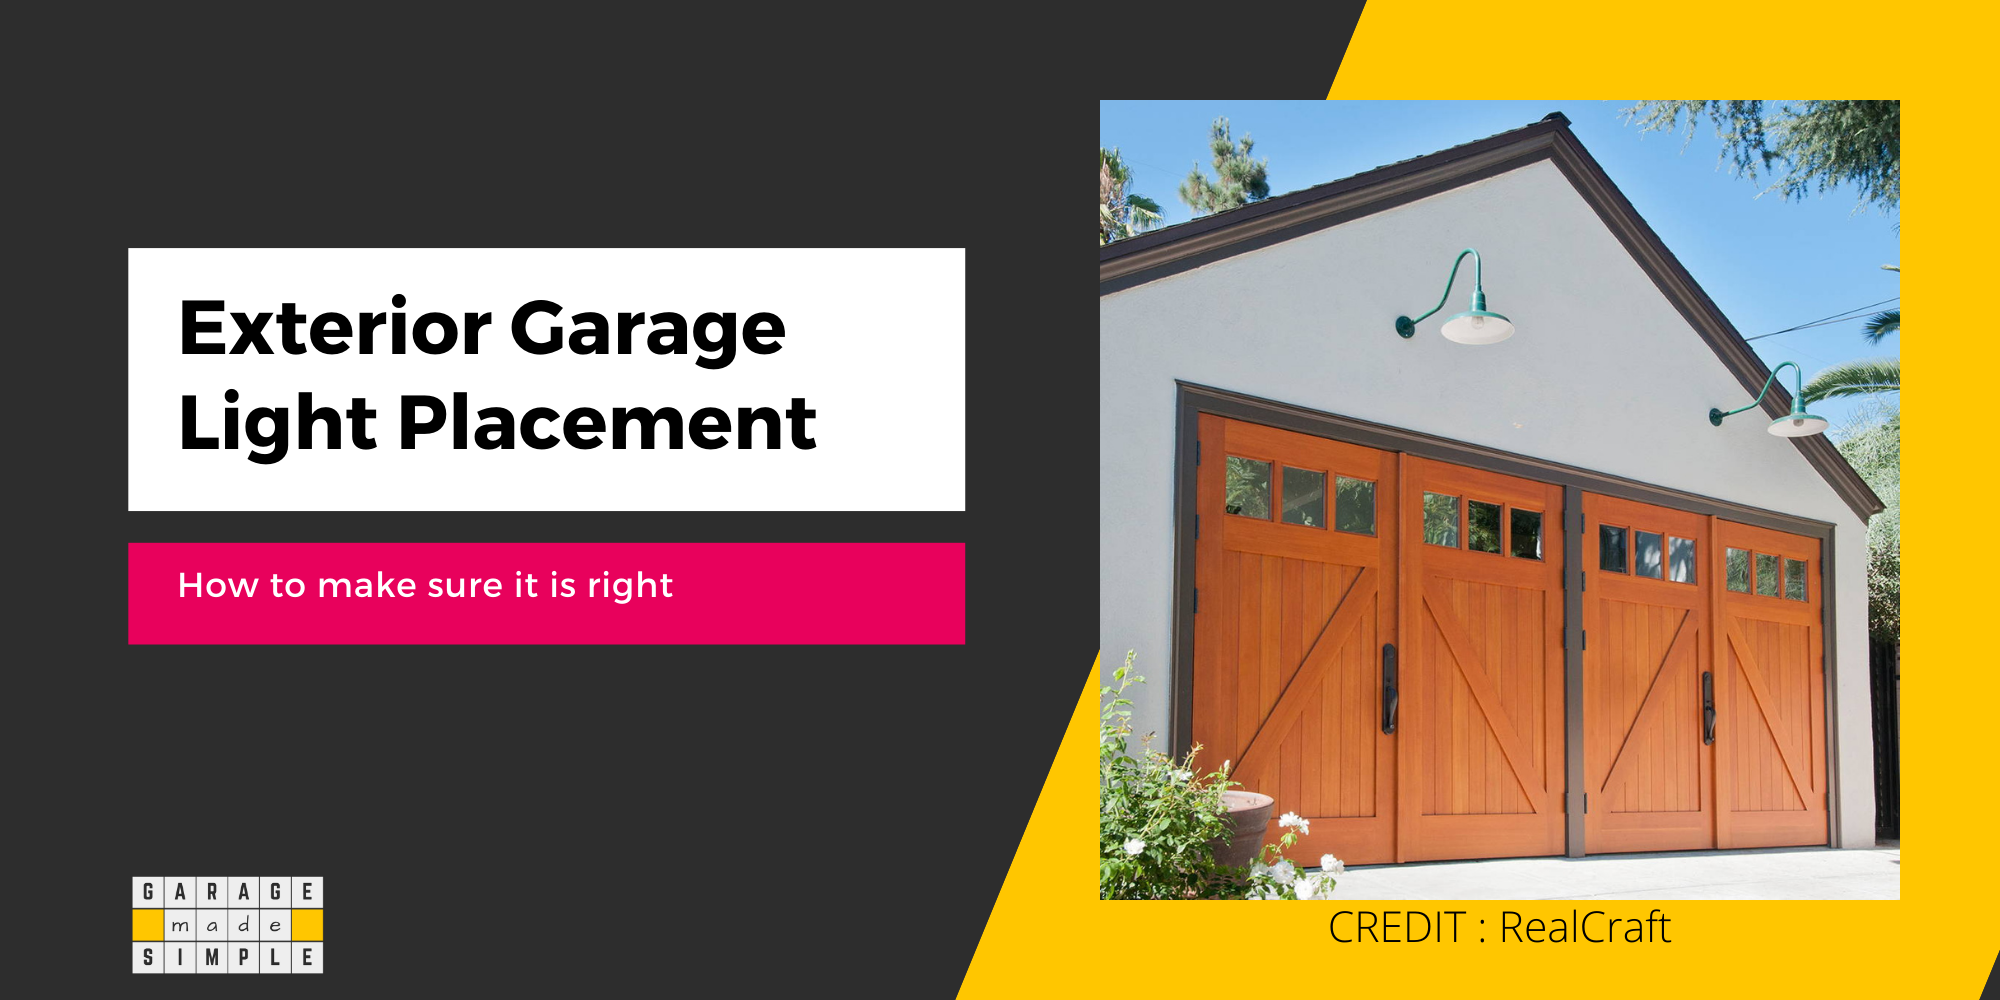 How to Make Sure Exterior Garage Light Placement Is Right